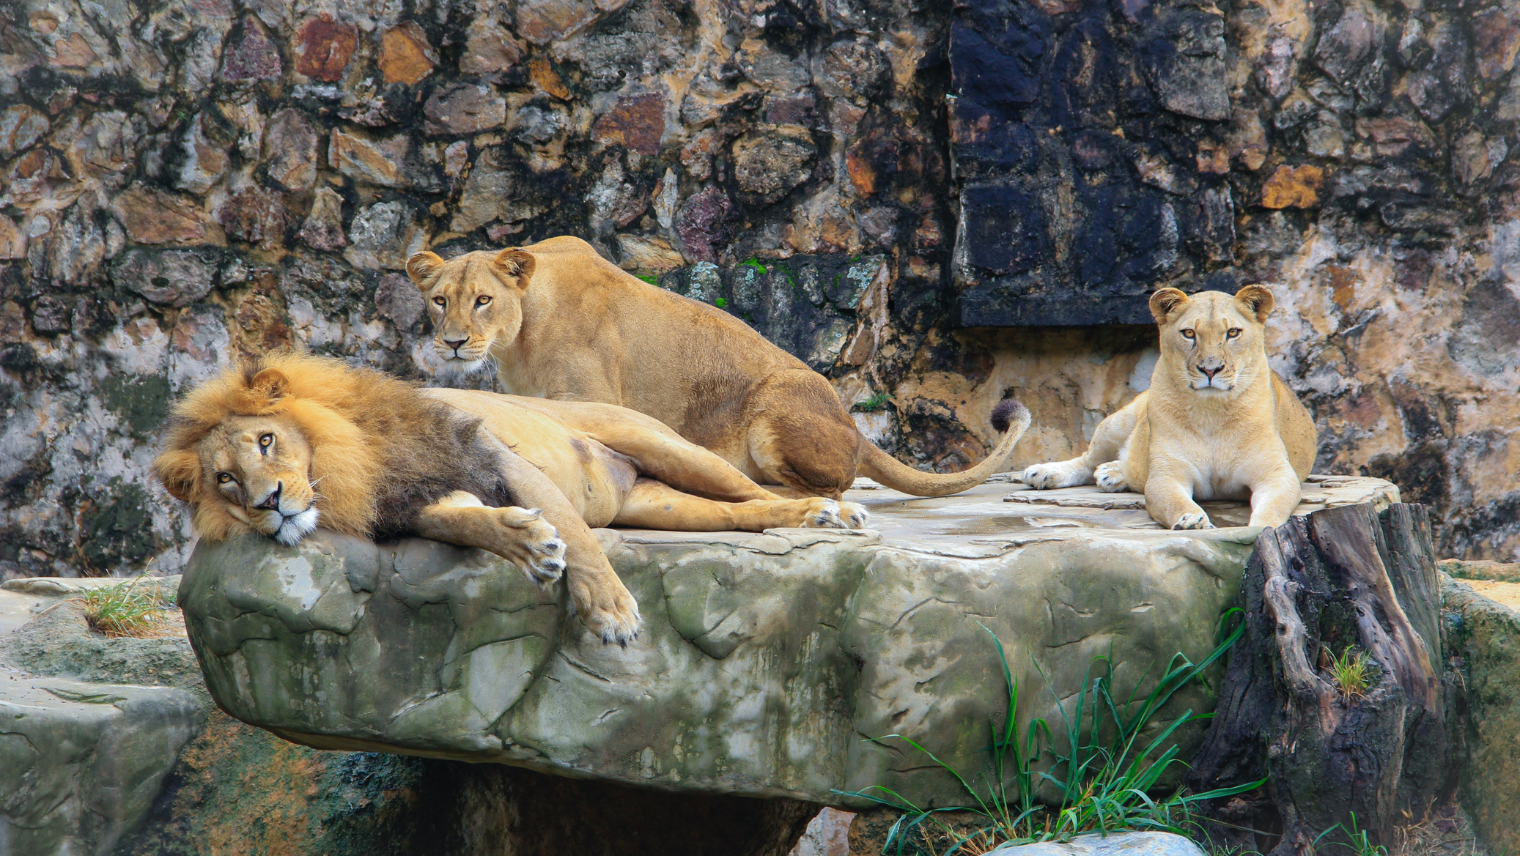 Image of 3 lions lying on rocks at the zoo